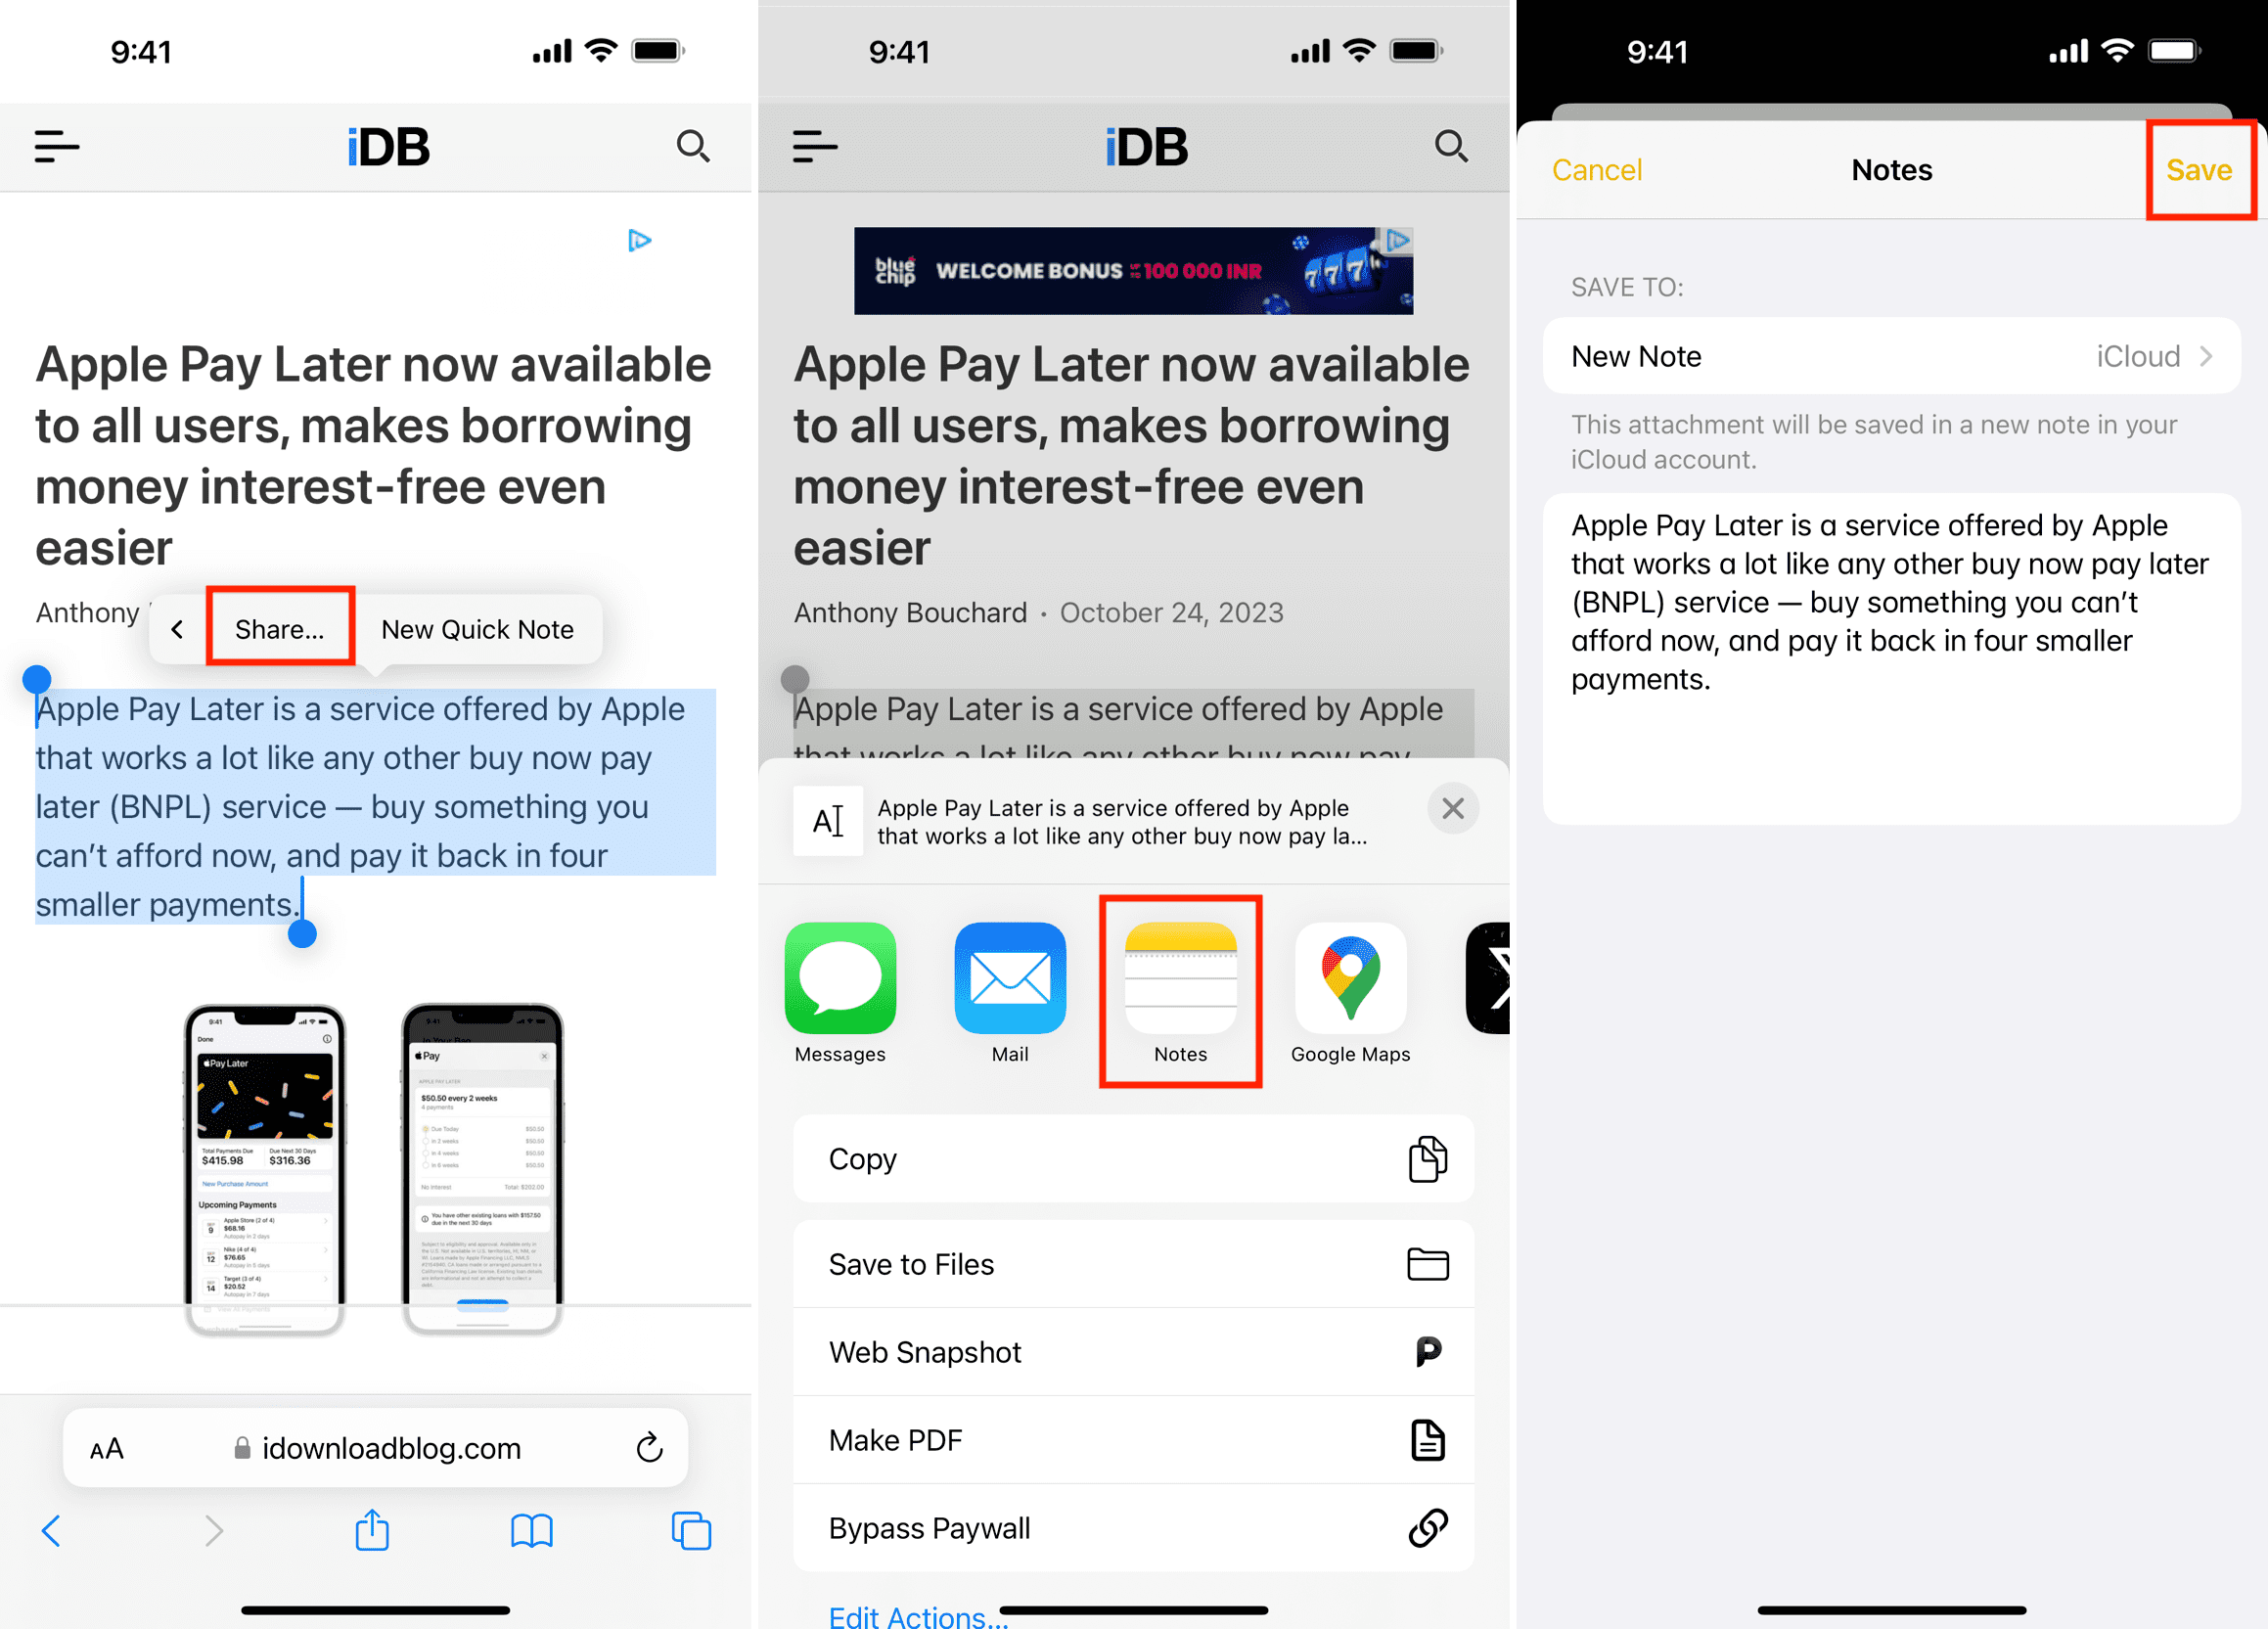 Save Safari web page text to Notes on iPhone